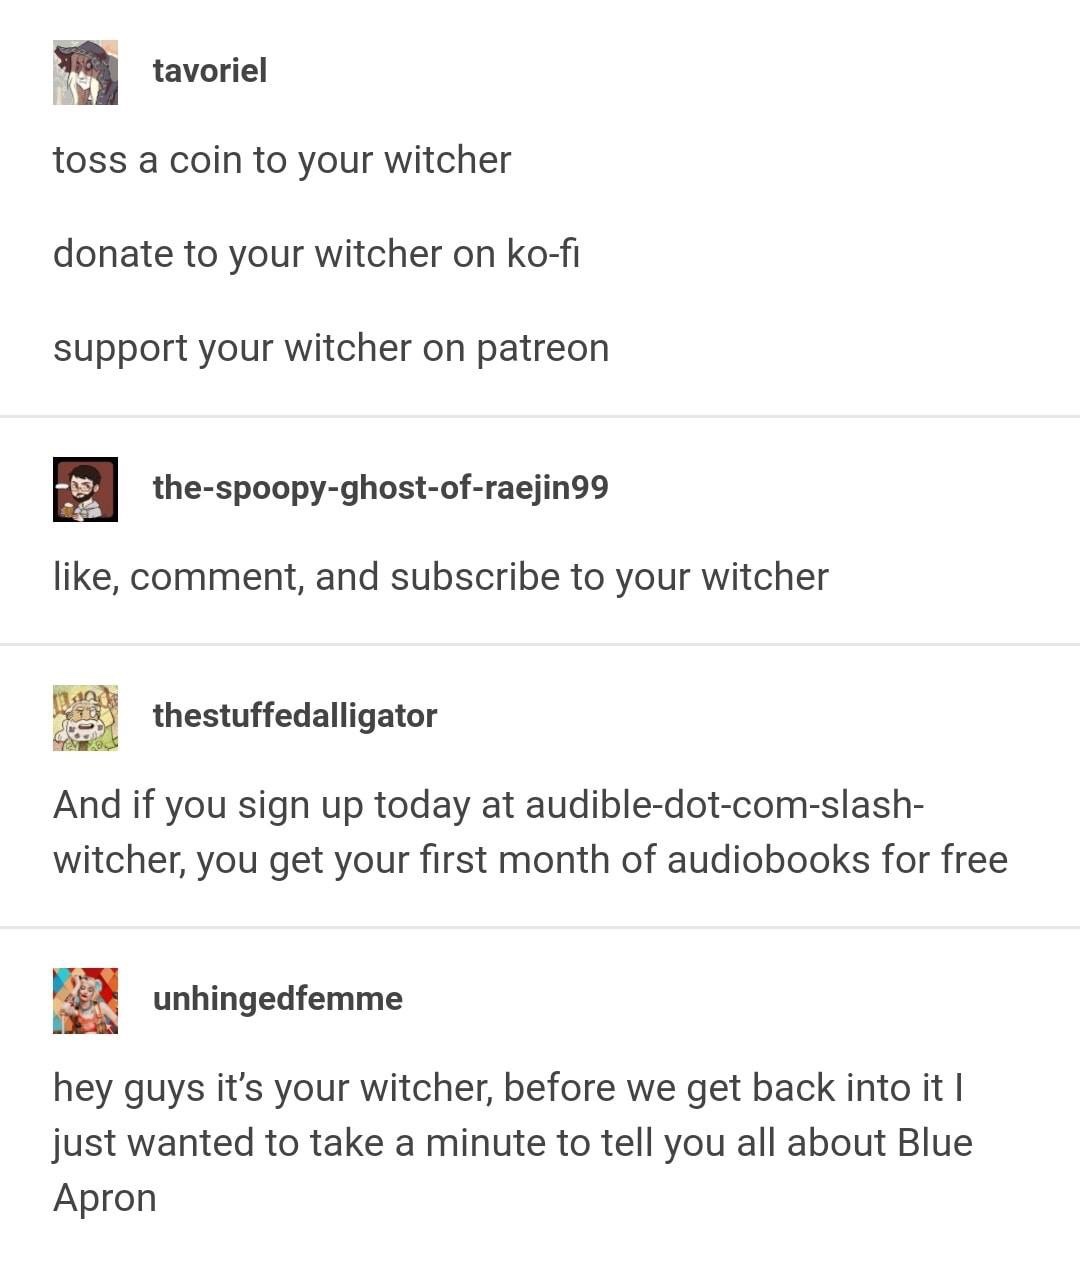 document - tavoriel toss a coin to your witcher donate to your witcher on kofi support your witcher on patreon thespoopyghostofraejin99 , comment, and subscribe to your witcher thestuffedalligator And if you sign up today at audibledotcomslash witcher, yo